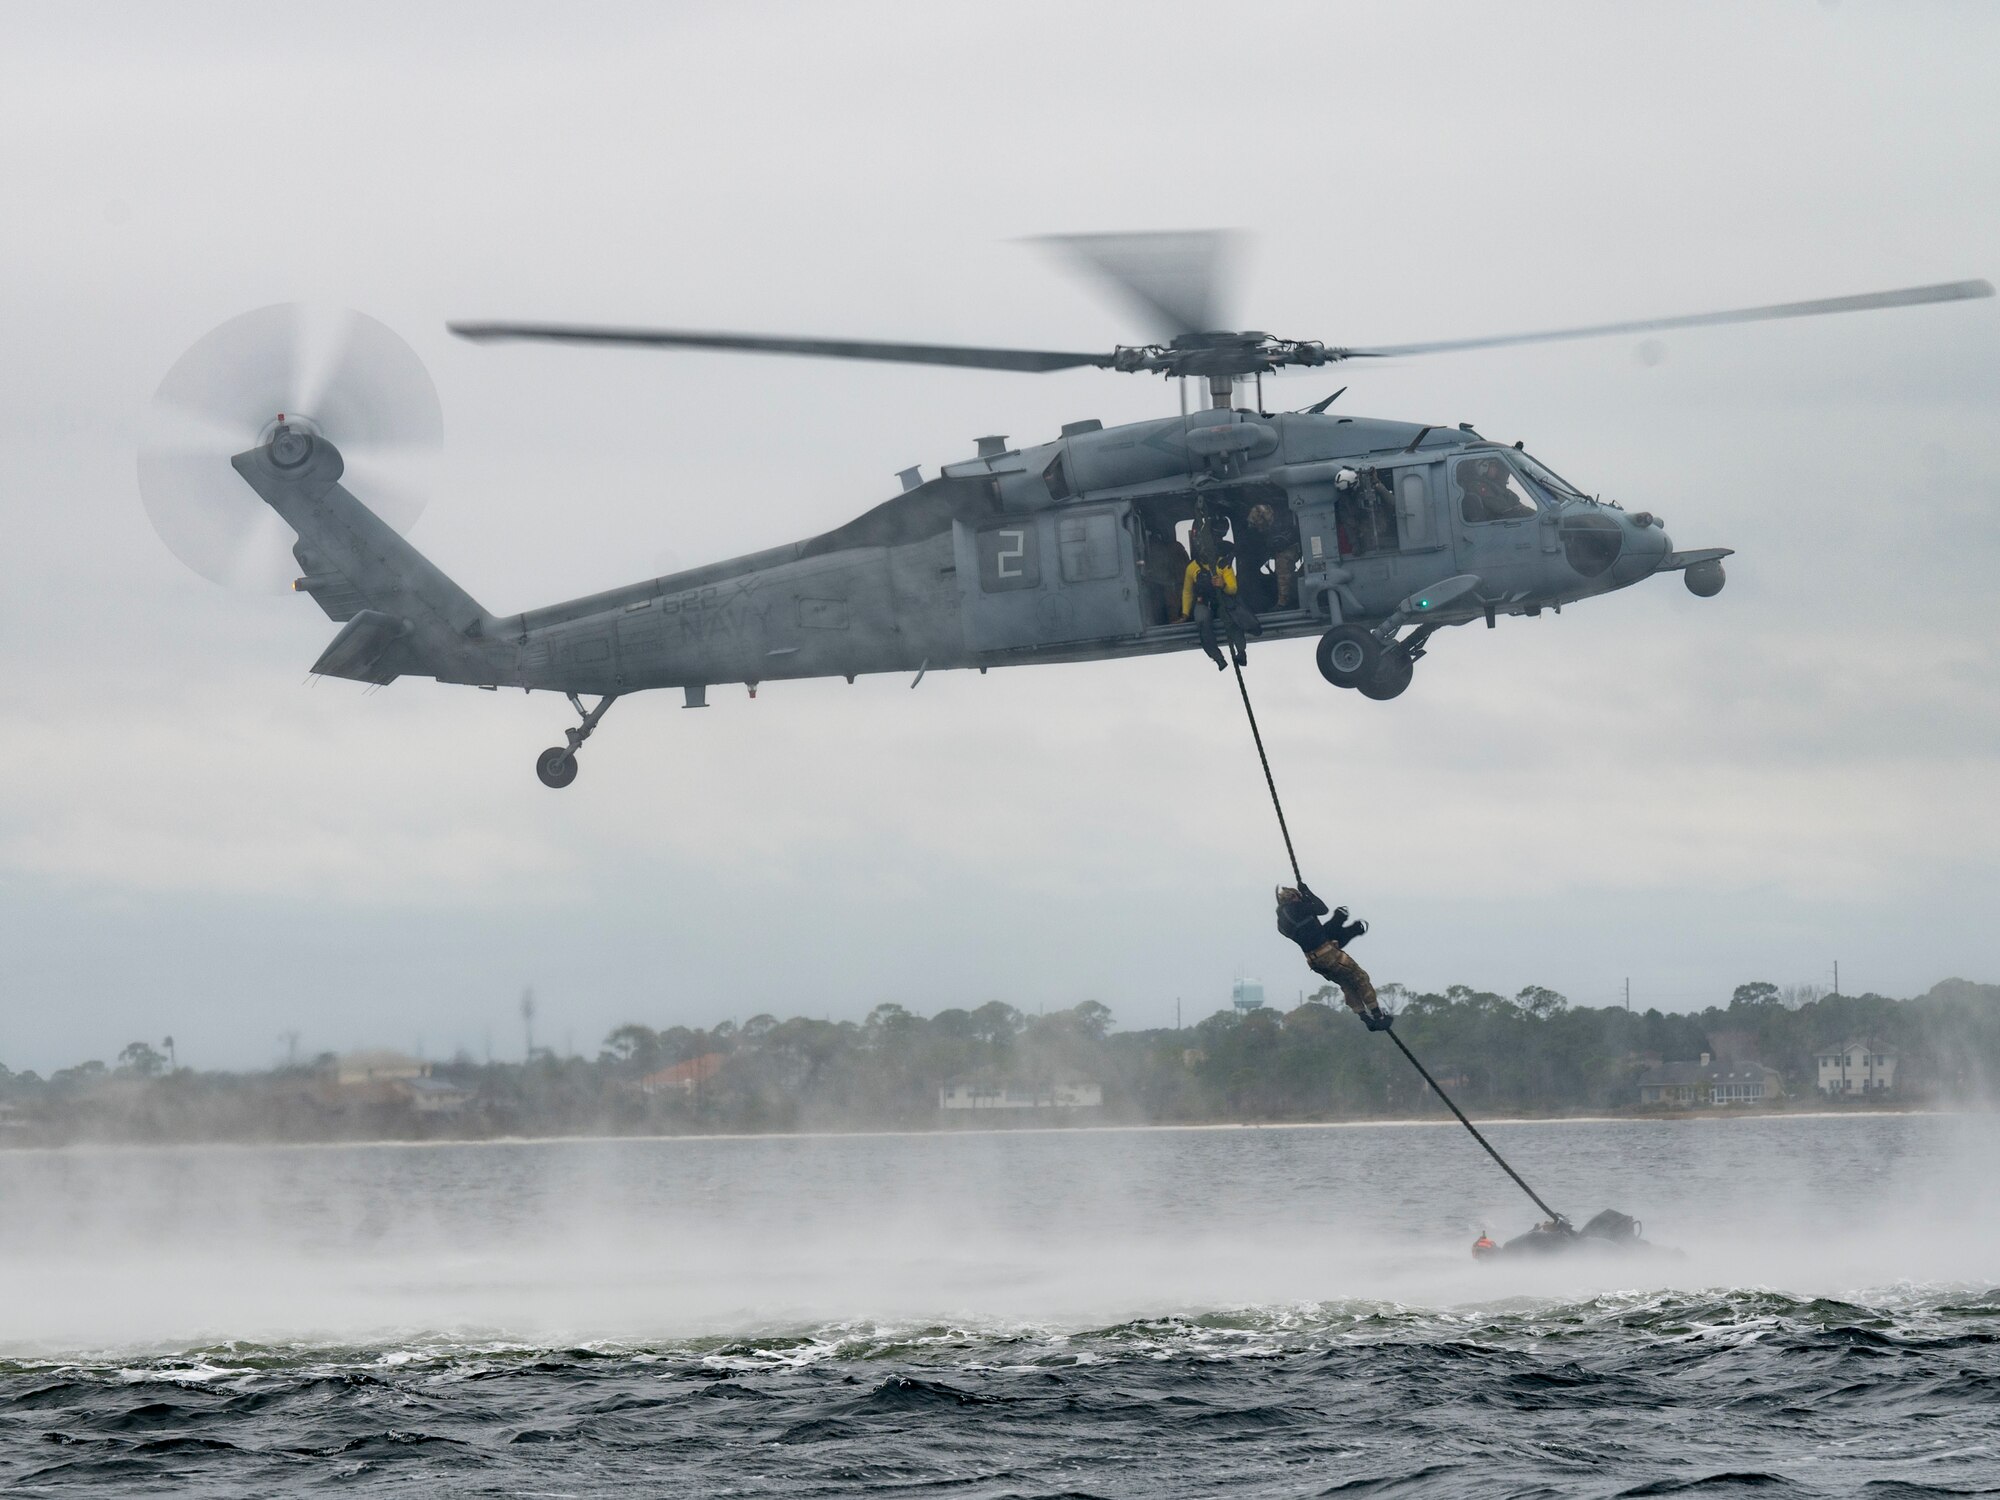 U.S. Air Force Special Tactics operators assigned to the 24th Special Operations Wing, conduct hoist operations with U.S. Navy MH-60 Seahawk aircrew members assigned to Helicopter Sea Combat Squadron Nine, during Emerald Warrior 21.1, at Hurlburt Field, Fla., Feb. 18, 2021.